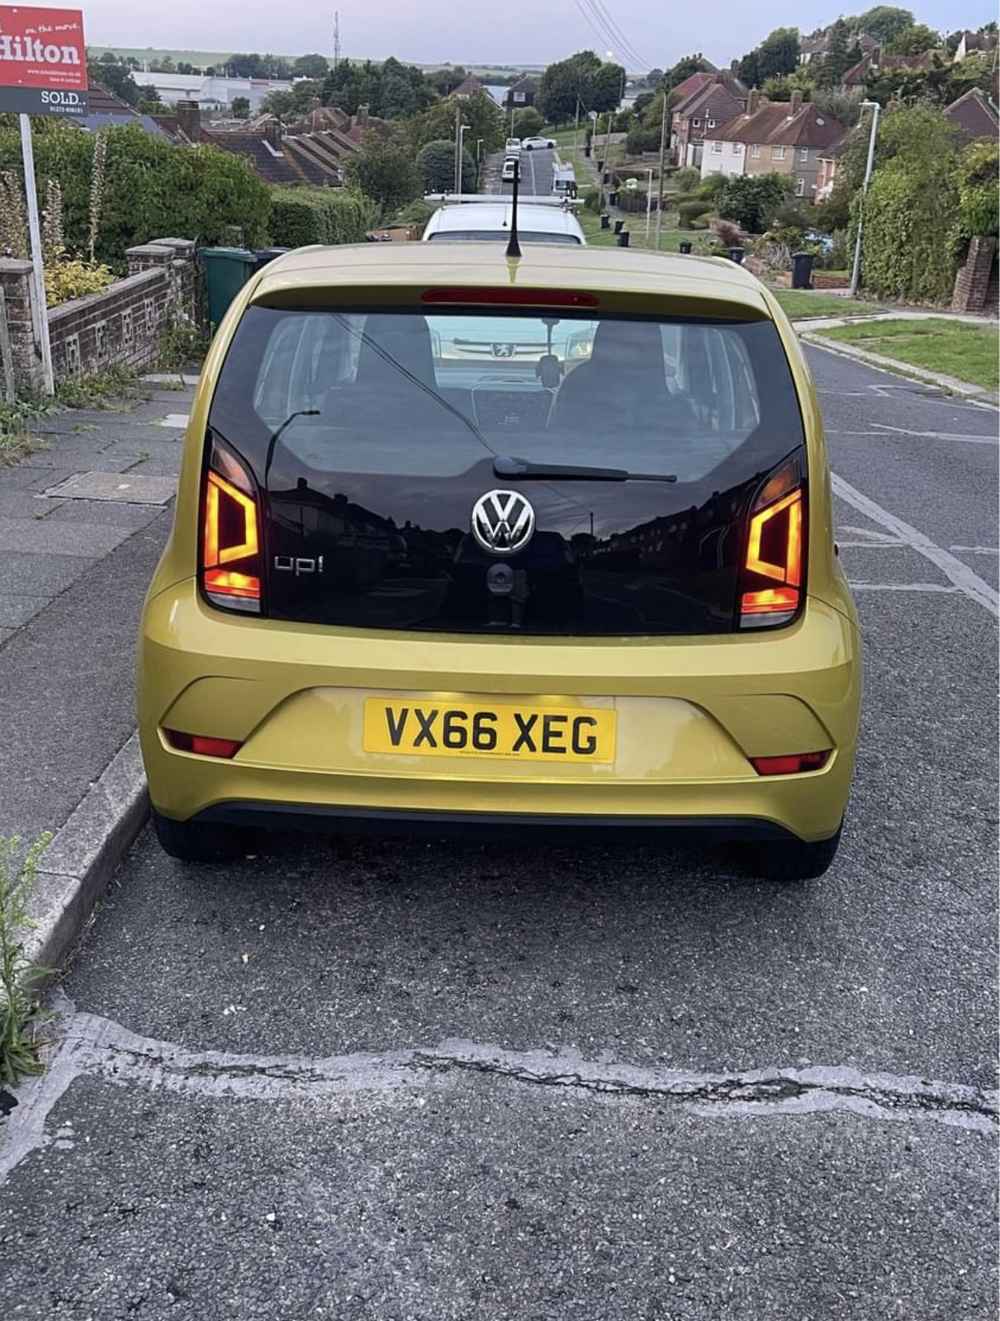 Photograph of VX66 XEG - a Gold Volkswagen Up parked in Hollingdean by a non-resident and stored here whilst a dodgy car dealer attempts to sell it. The third of four photographs supplied by the residents of Hollingdean.